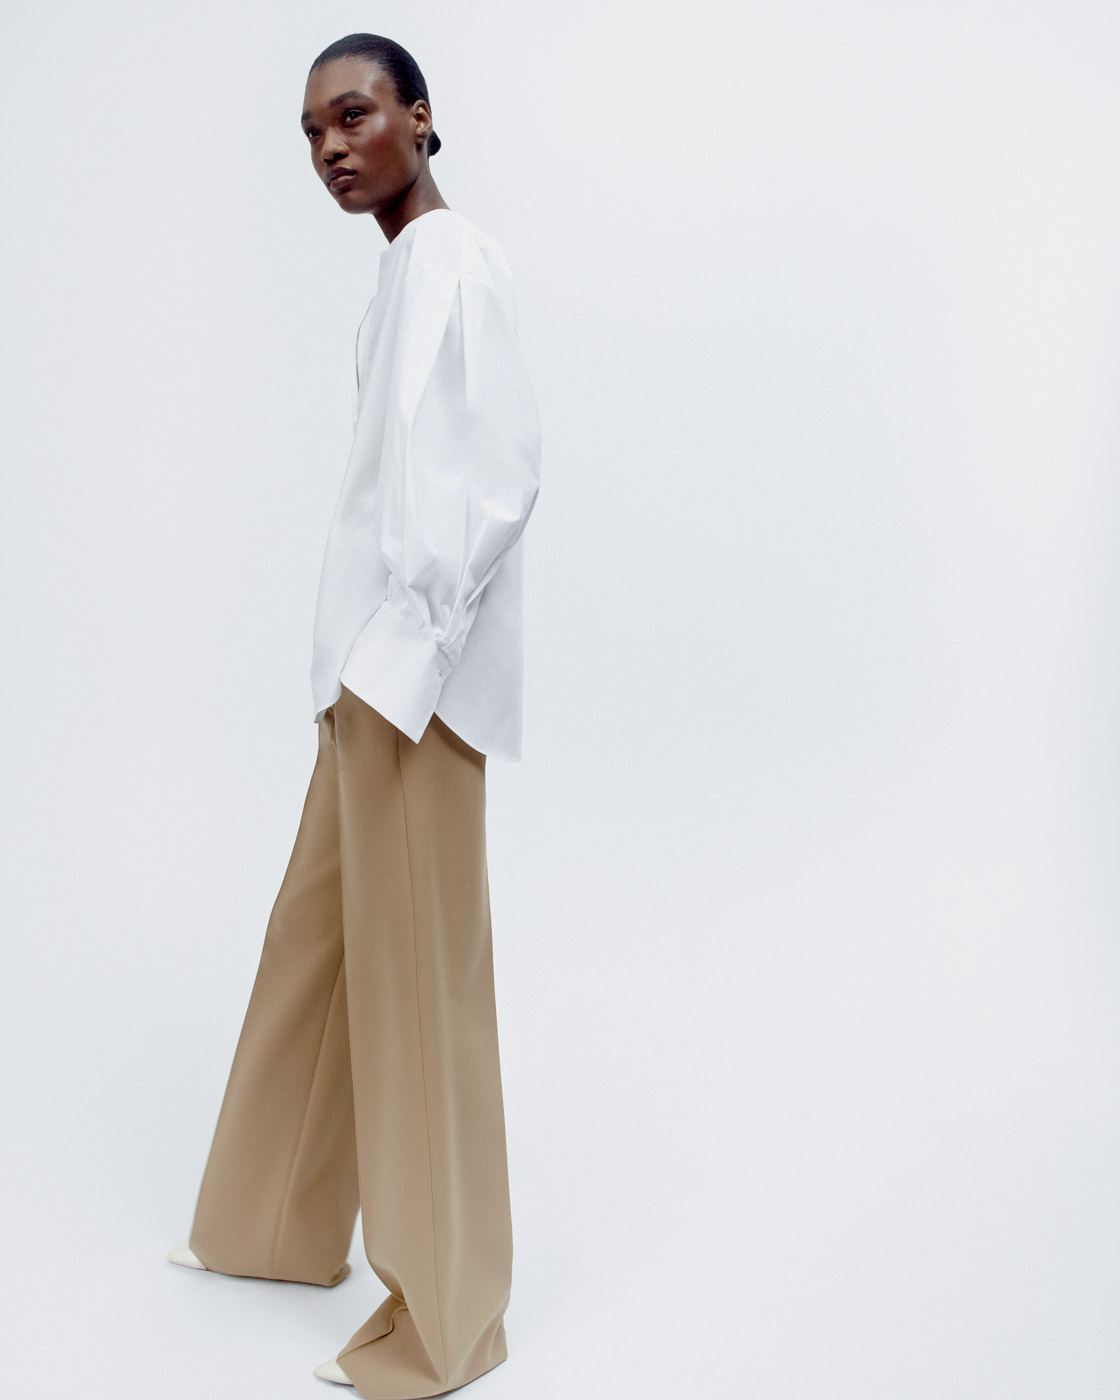 46 Sr2023 04 075 Another Tomorrow Exaggerated Bib Blouse And Doppio Wide Leg Pant, Anothertomorrow.co